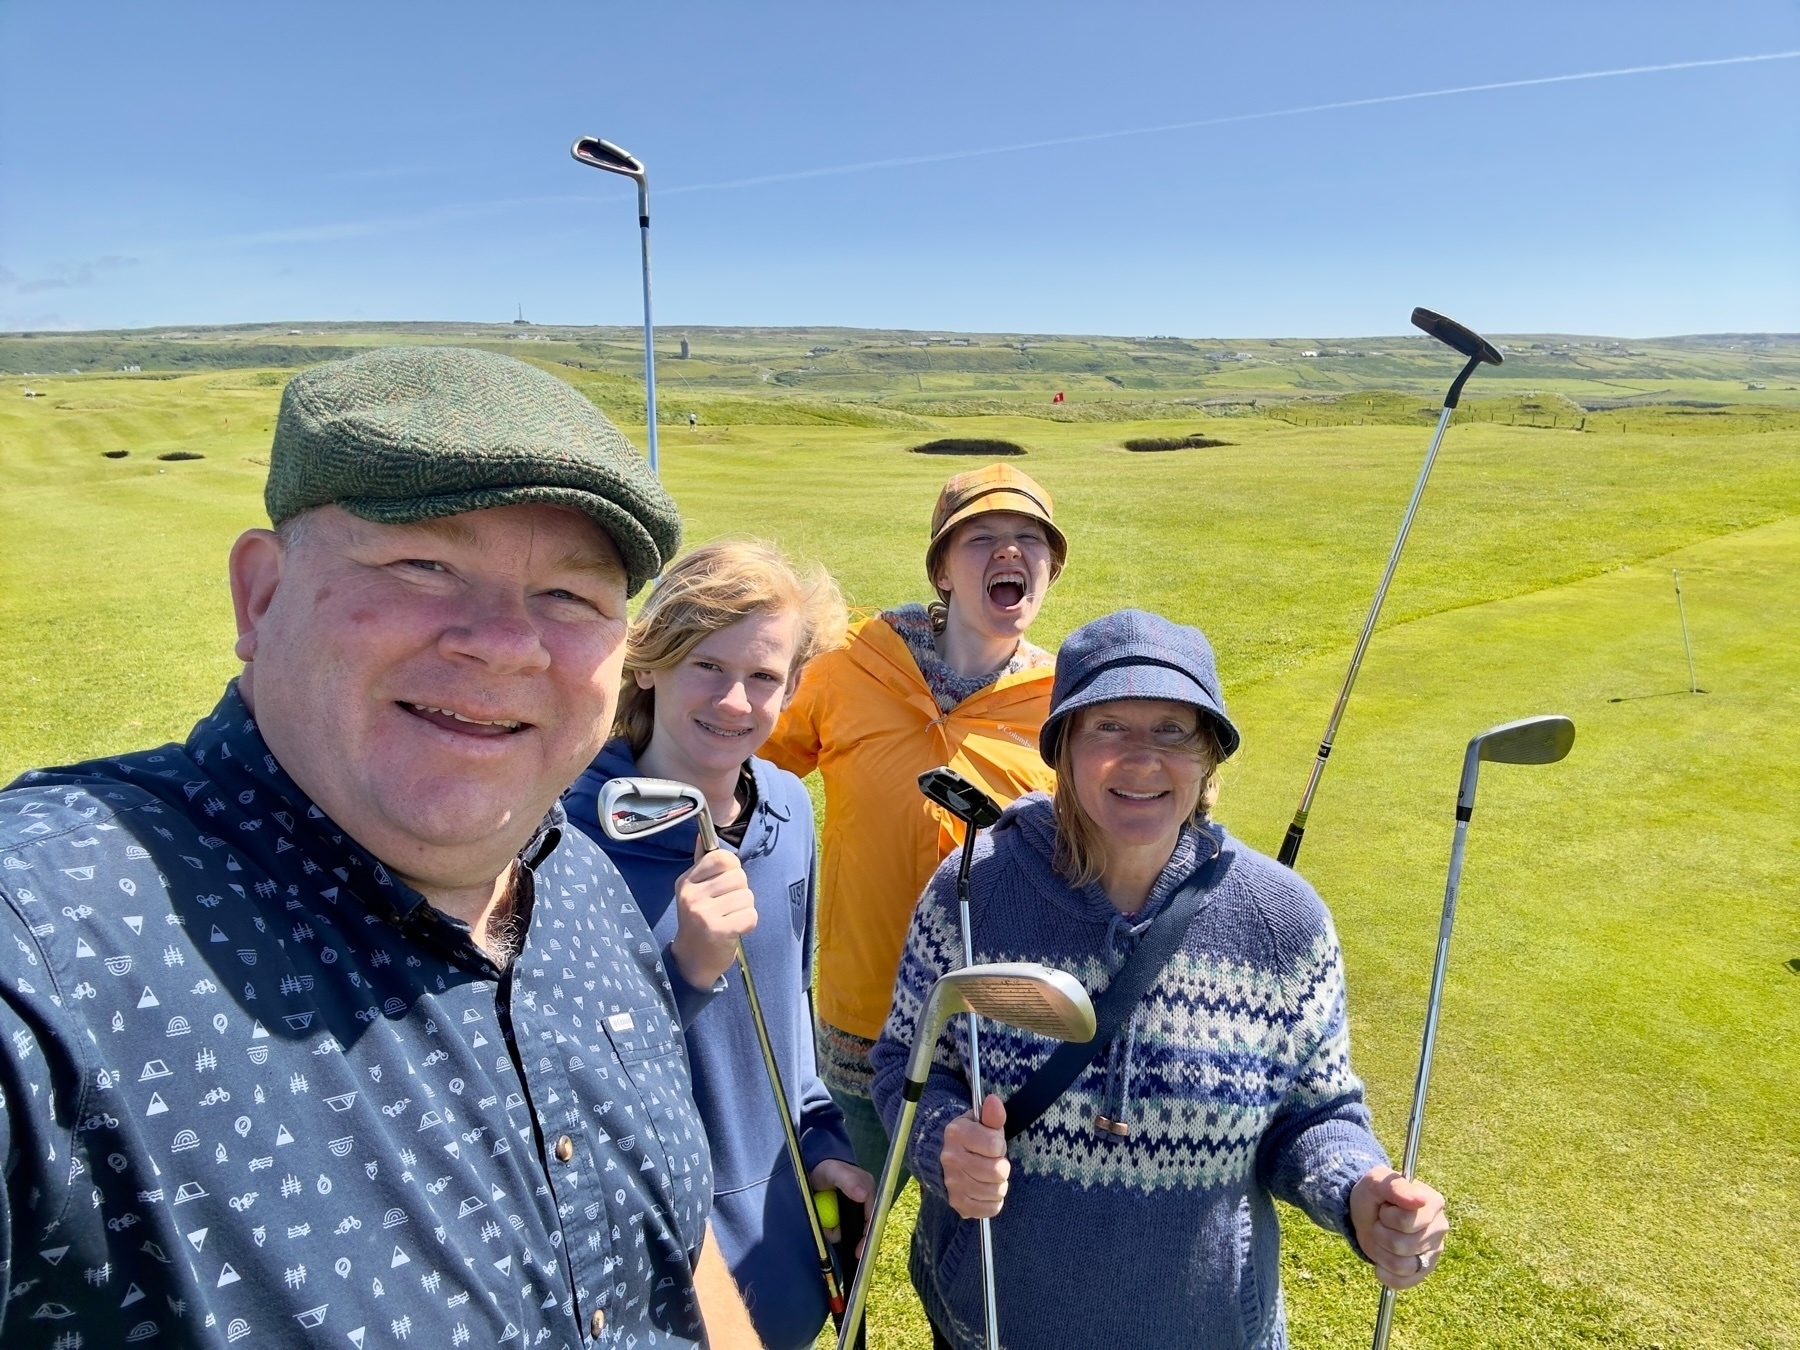 Auto-generated description: A smiling group of four people, each holding golf clubs, is standing together on a sunny golf course.